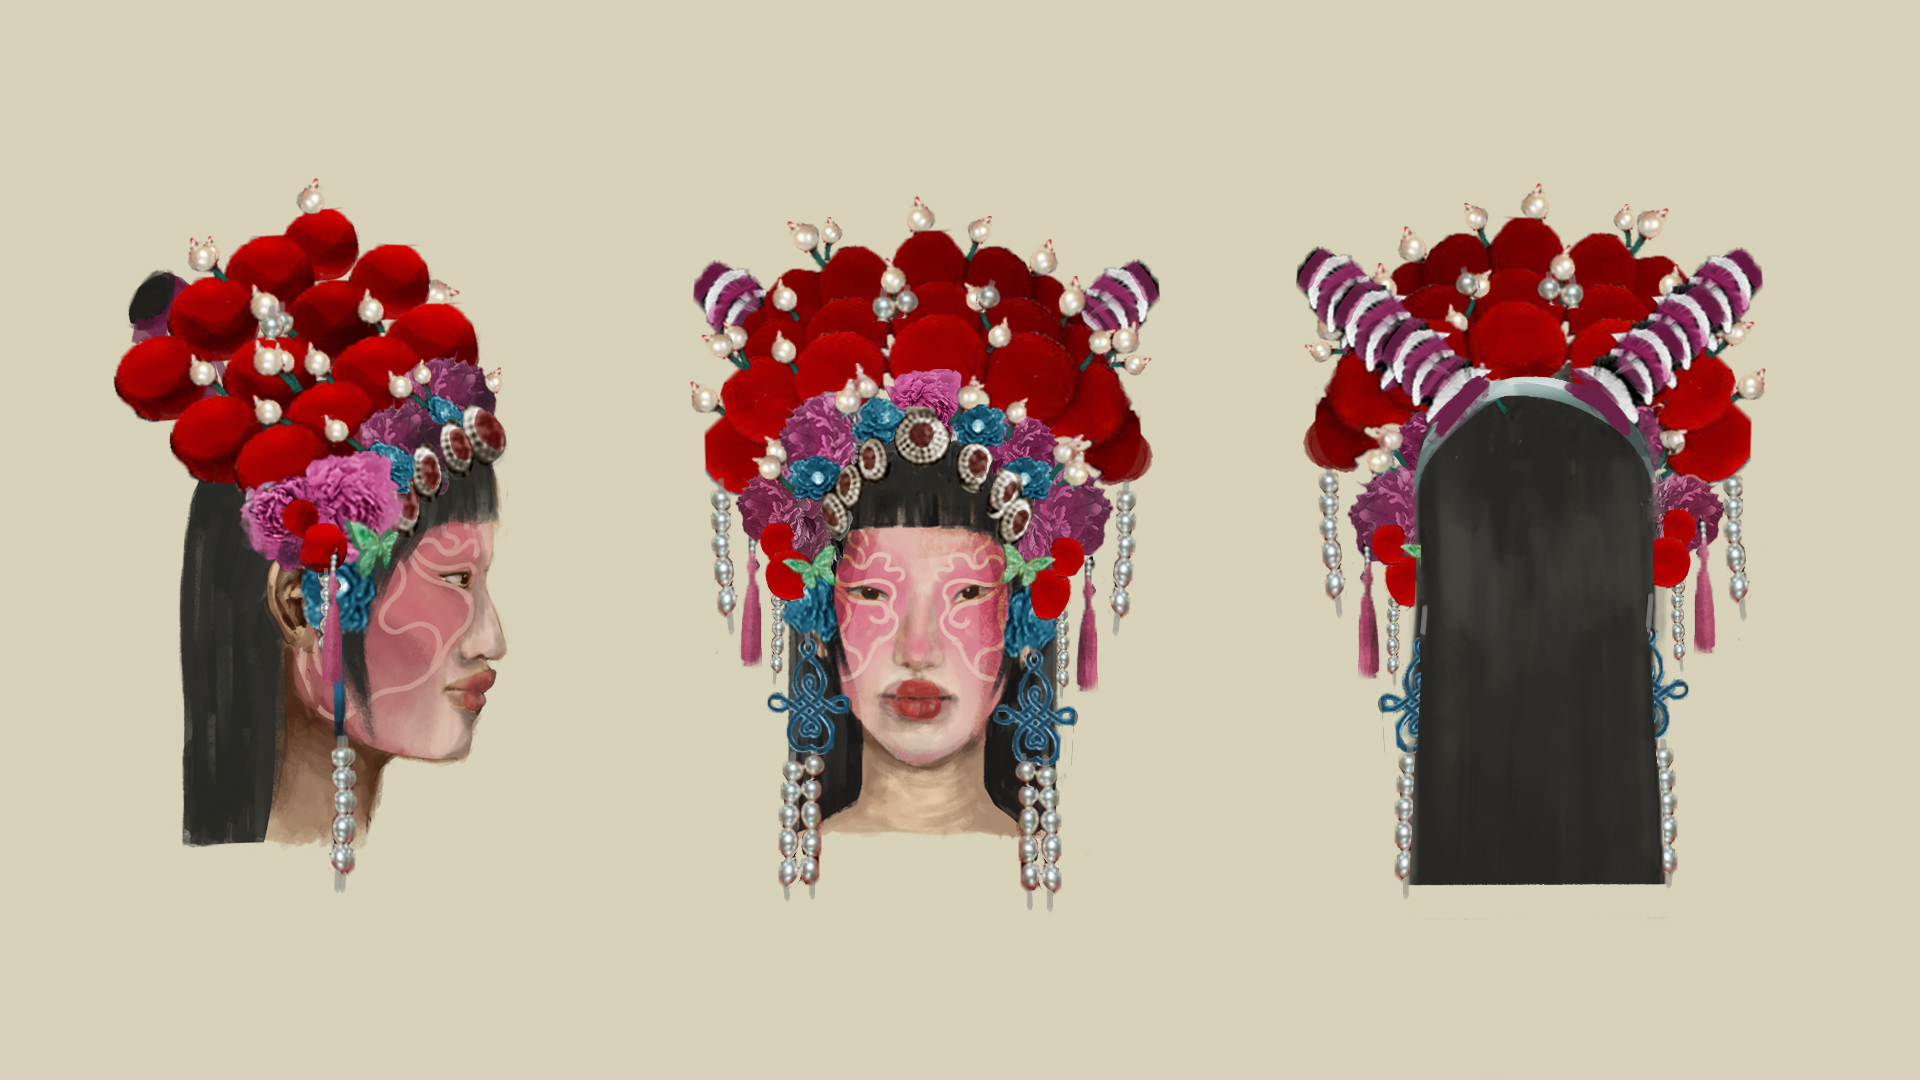 Digital illustration showing 3 different angles of a character's head and headdress featuring red pompoms, pearls, flowers and jewellery.